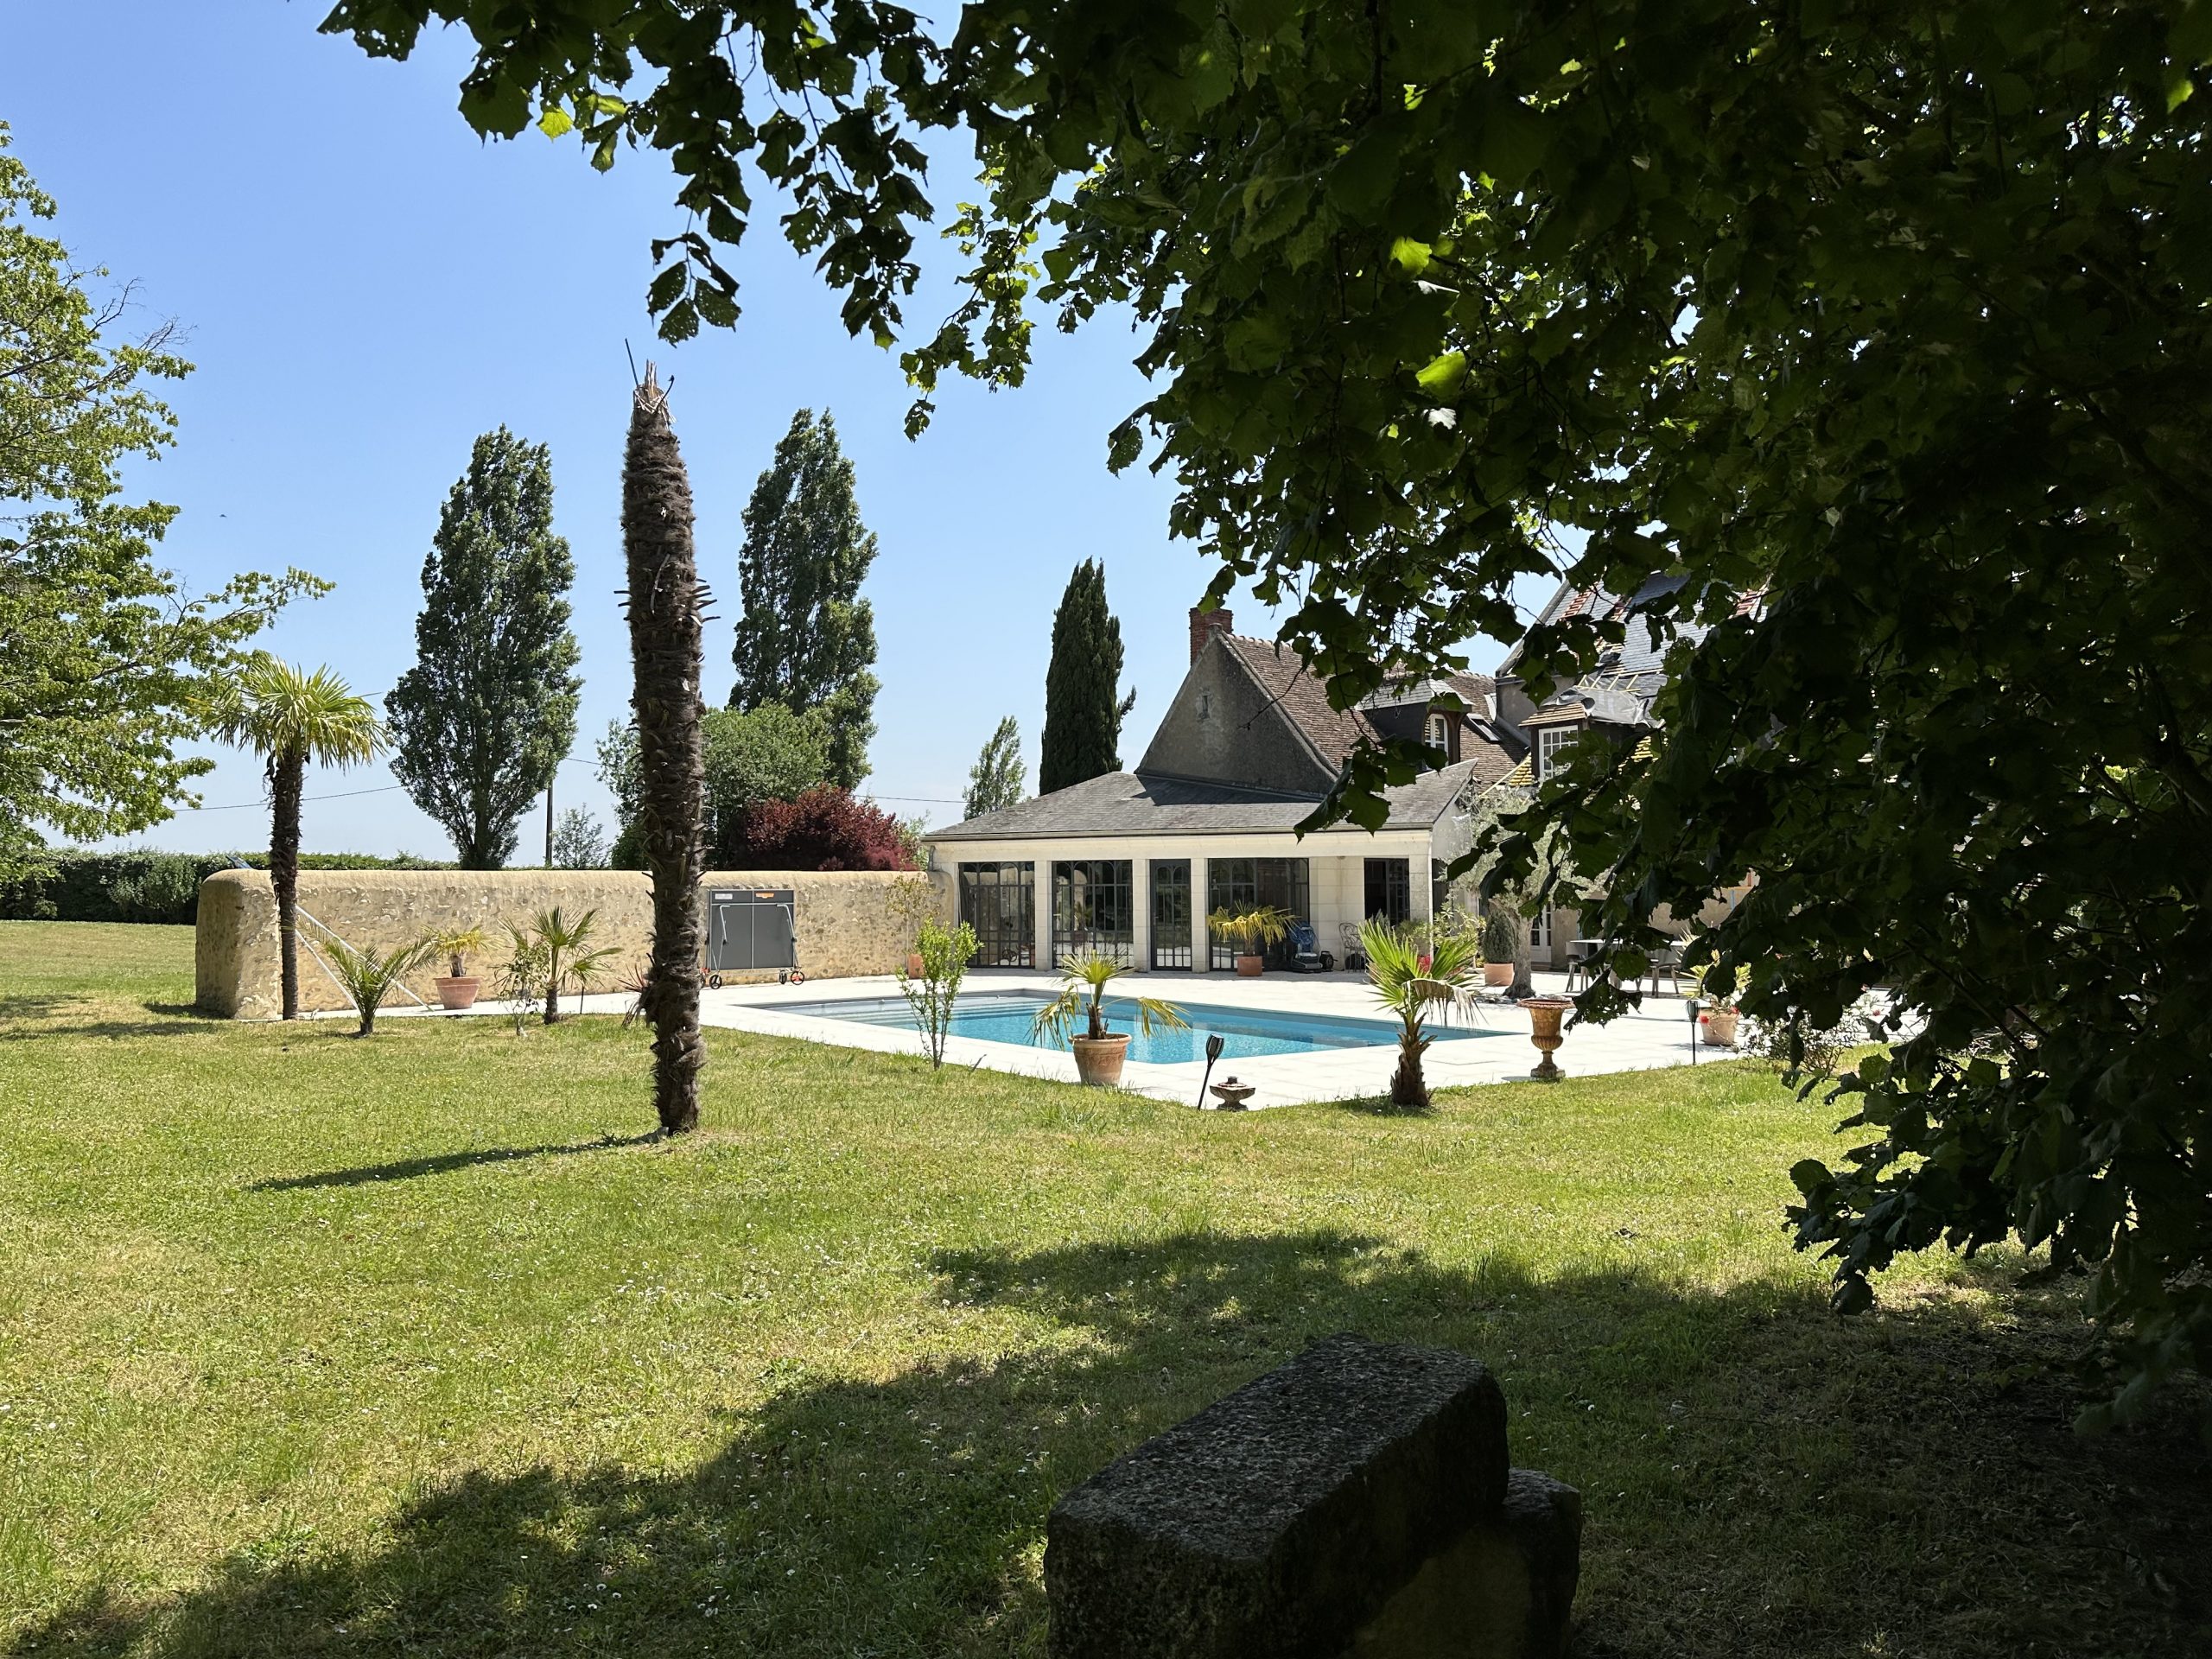 NORTH PROPERTY of TOURS PARC on 2 Hectares SWIMMING POOL GARAGE